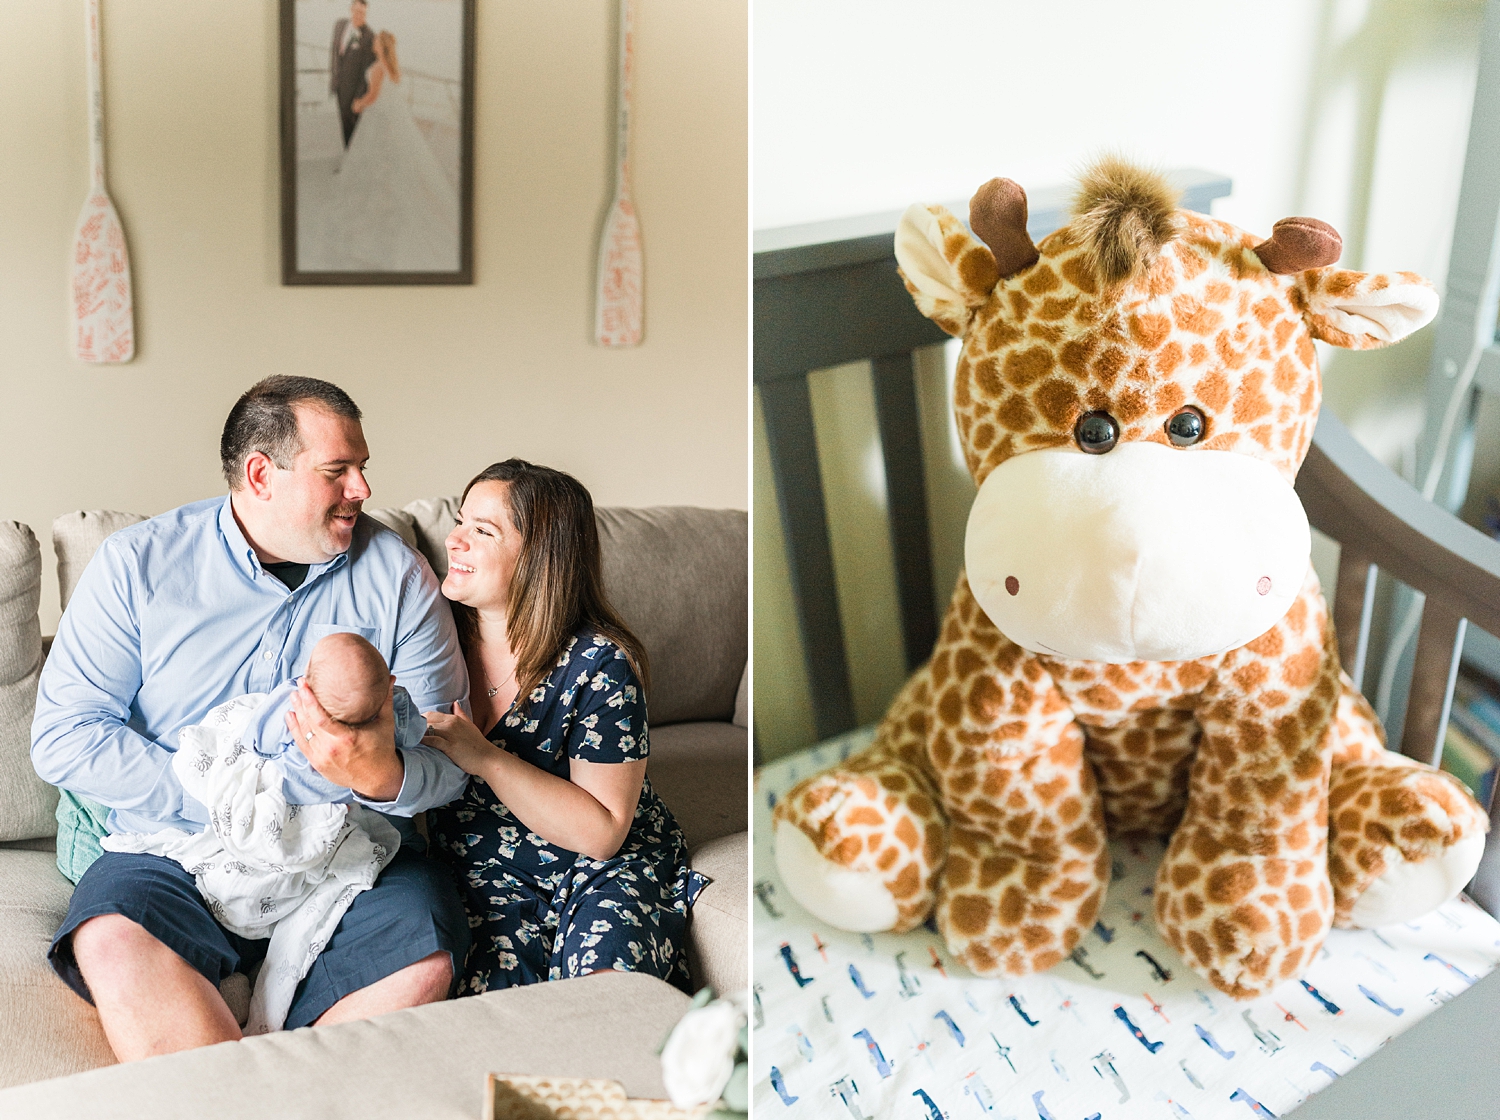 Intimate Family photos at home